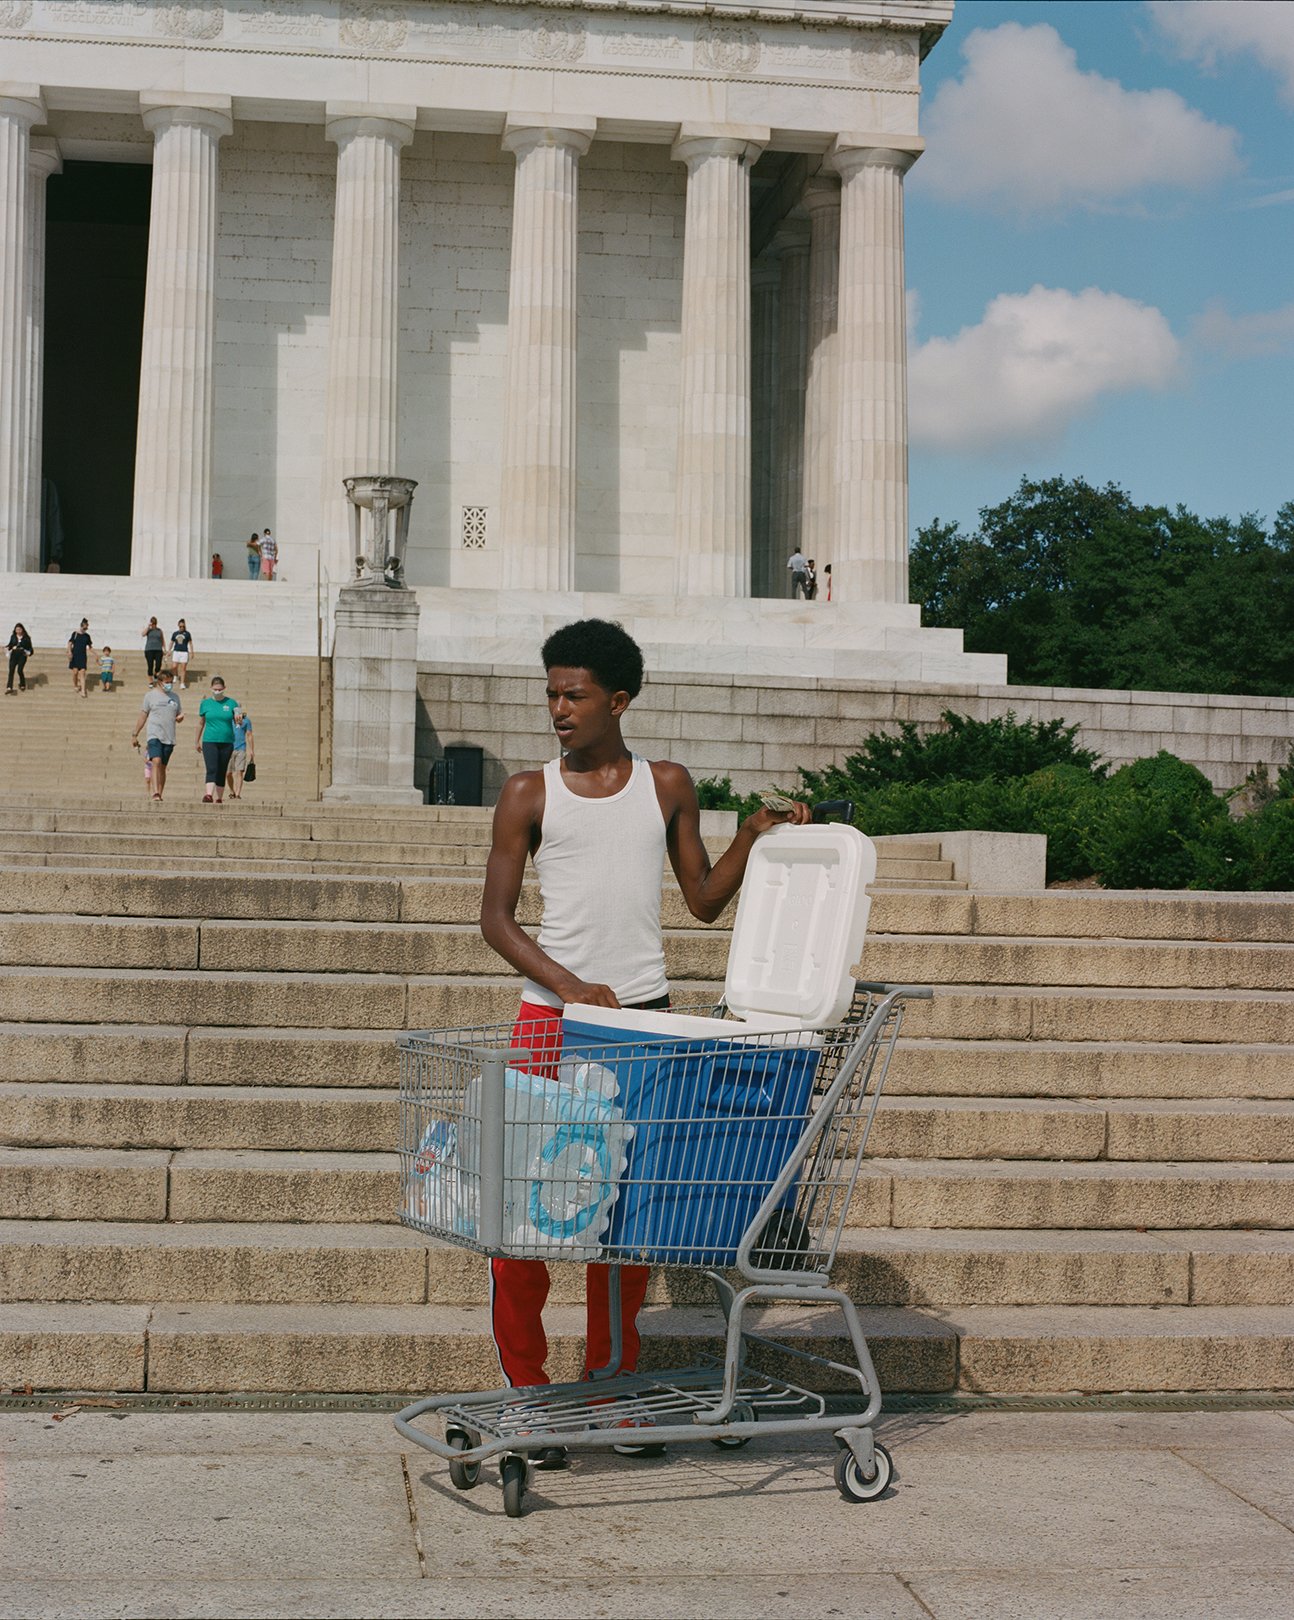   Kenny Sells Water in Front of the Lincoln Memorial , Washington D.C, 2020  